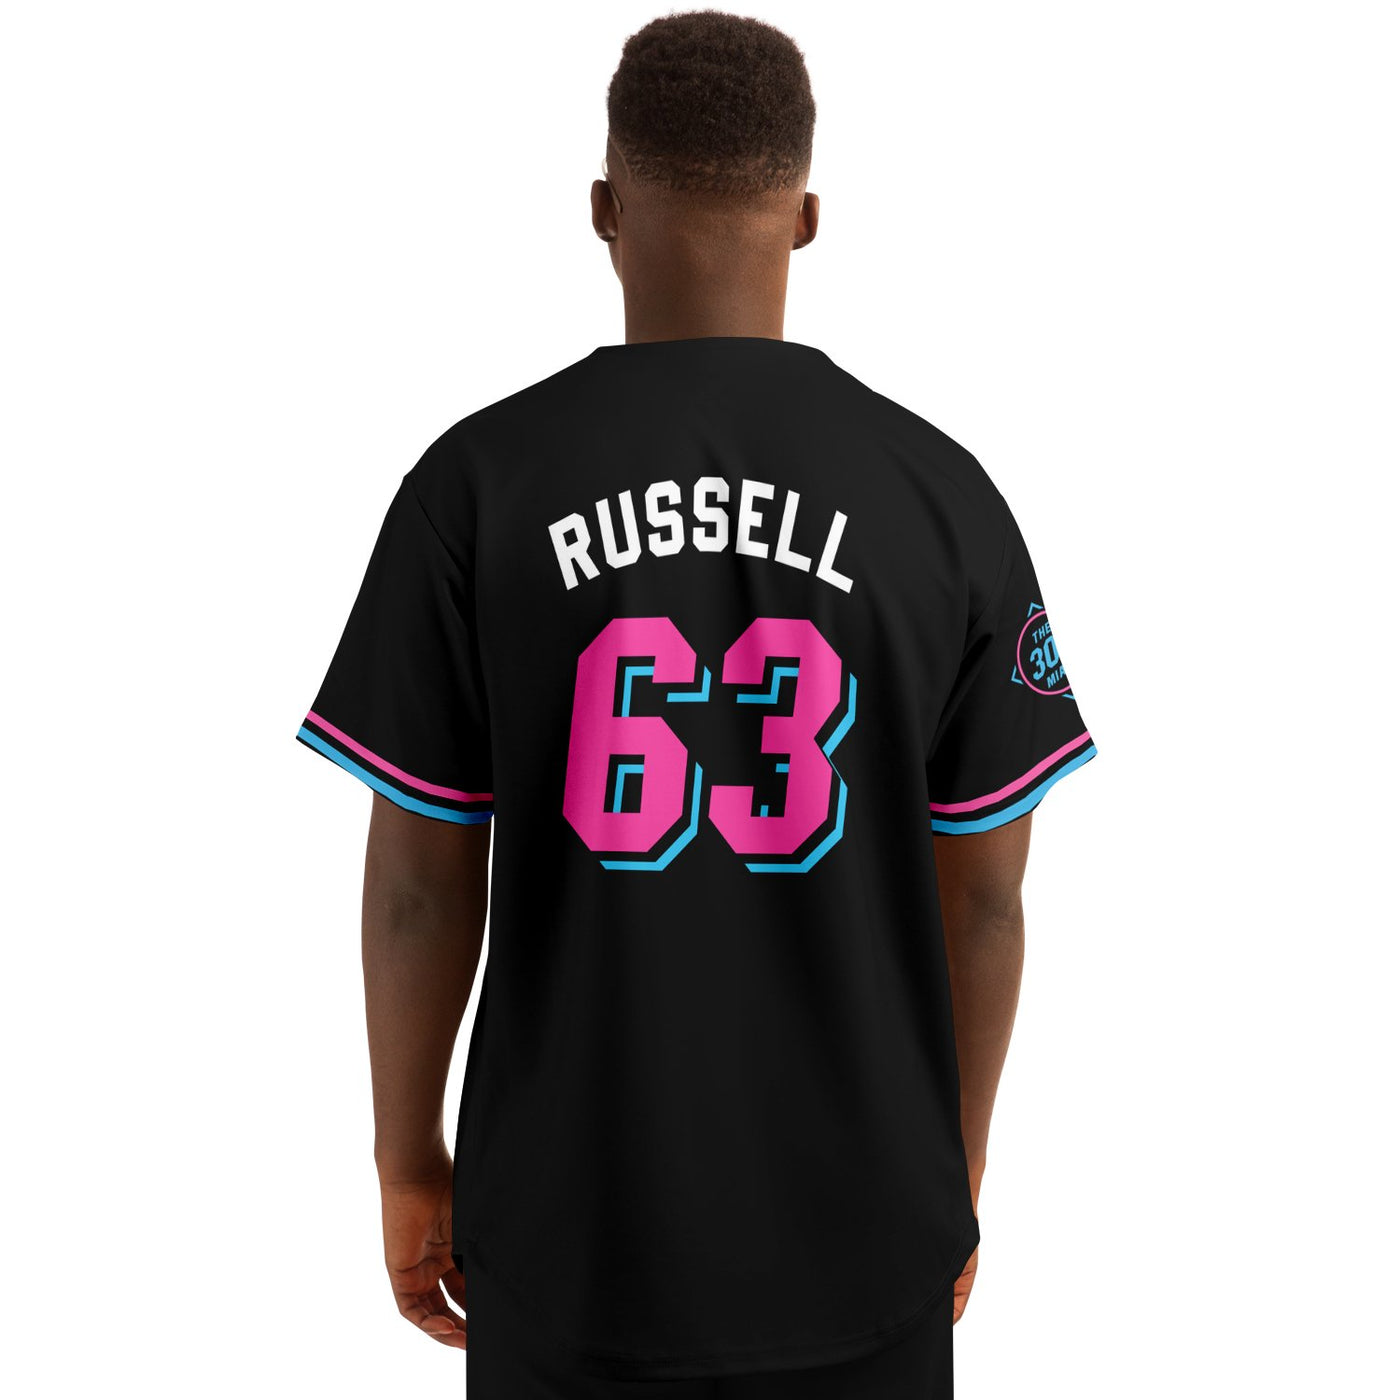 Russell - Vice City Jersey - Furious Motorsport